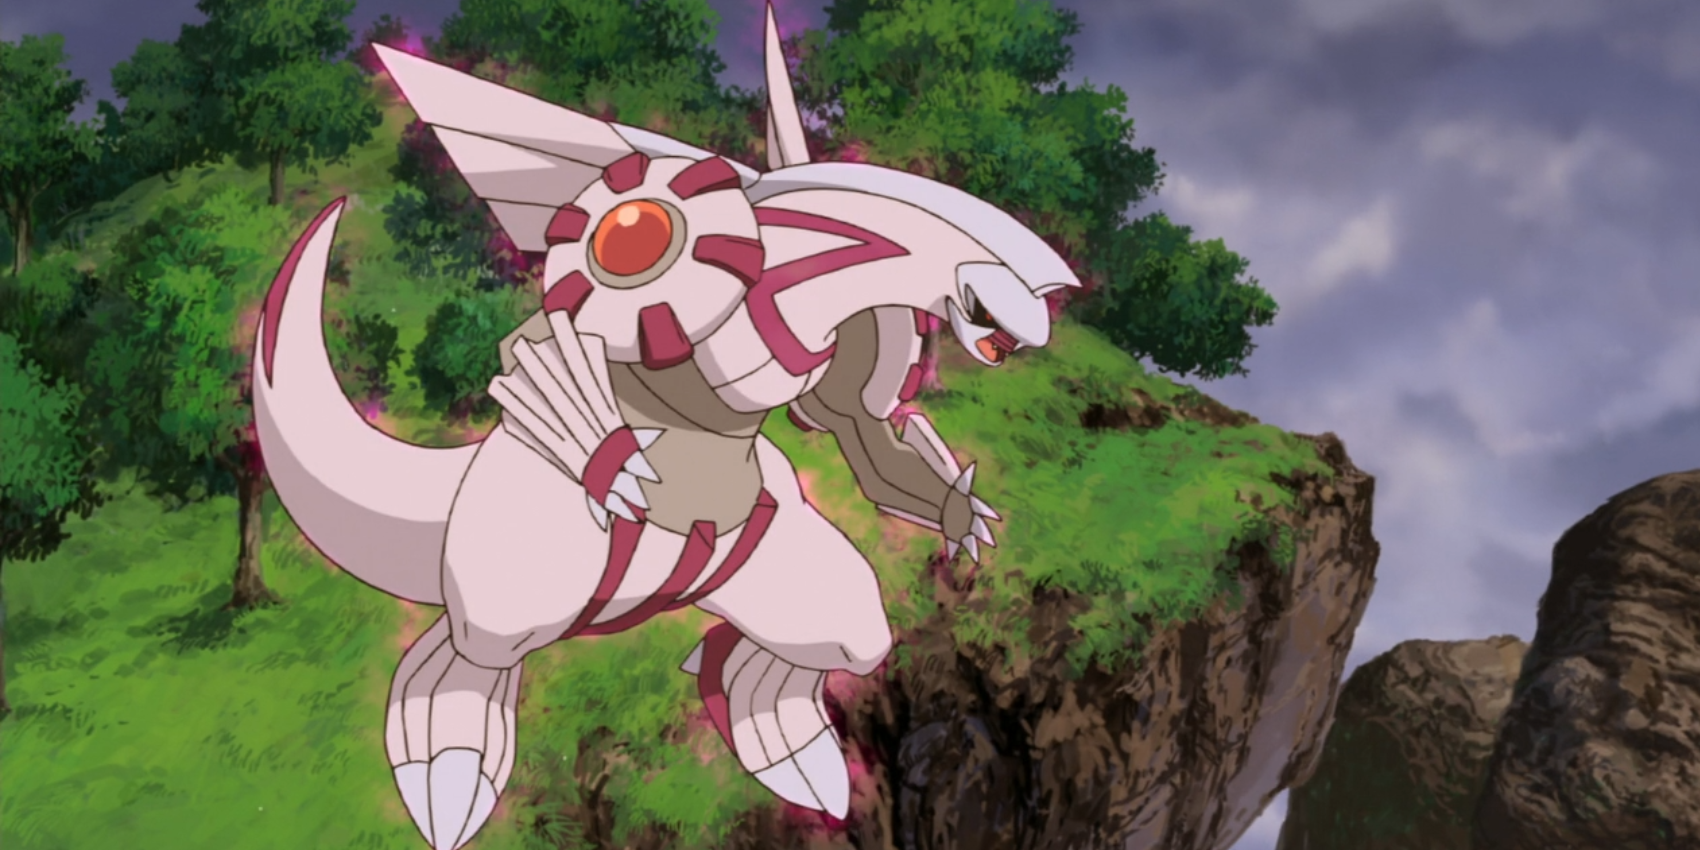 Palkia floating surrounded by pink light in the Pokémon anime